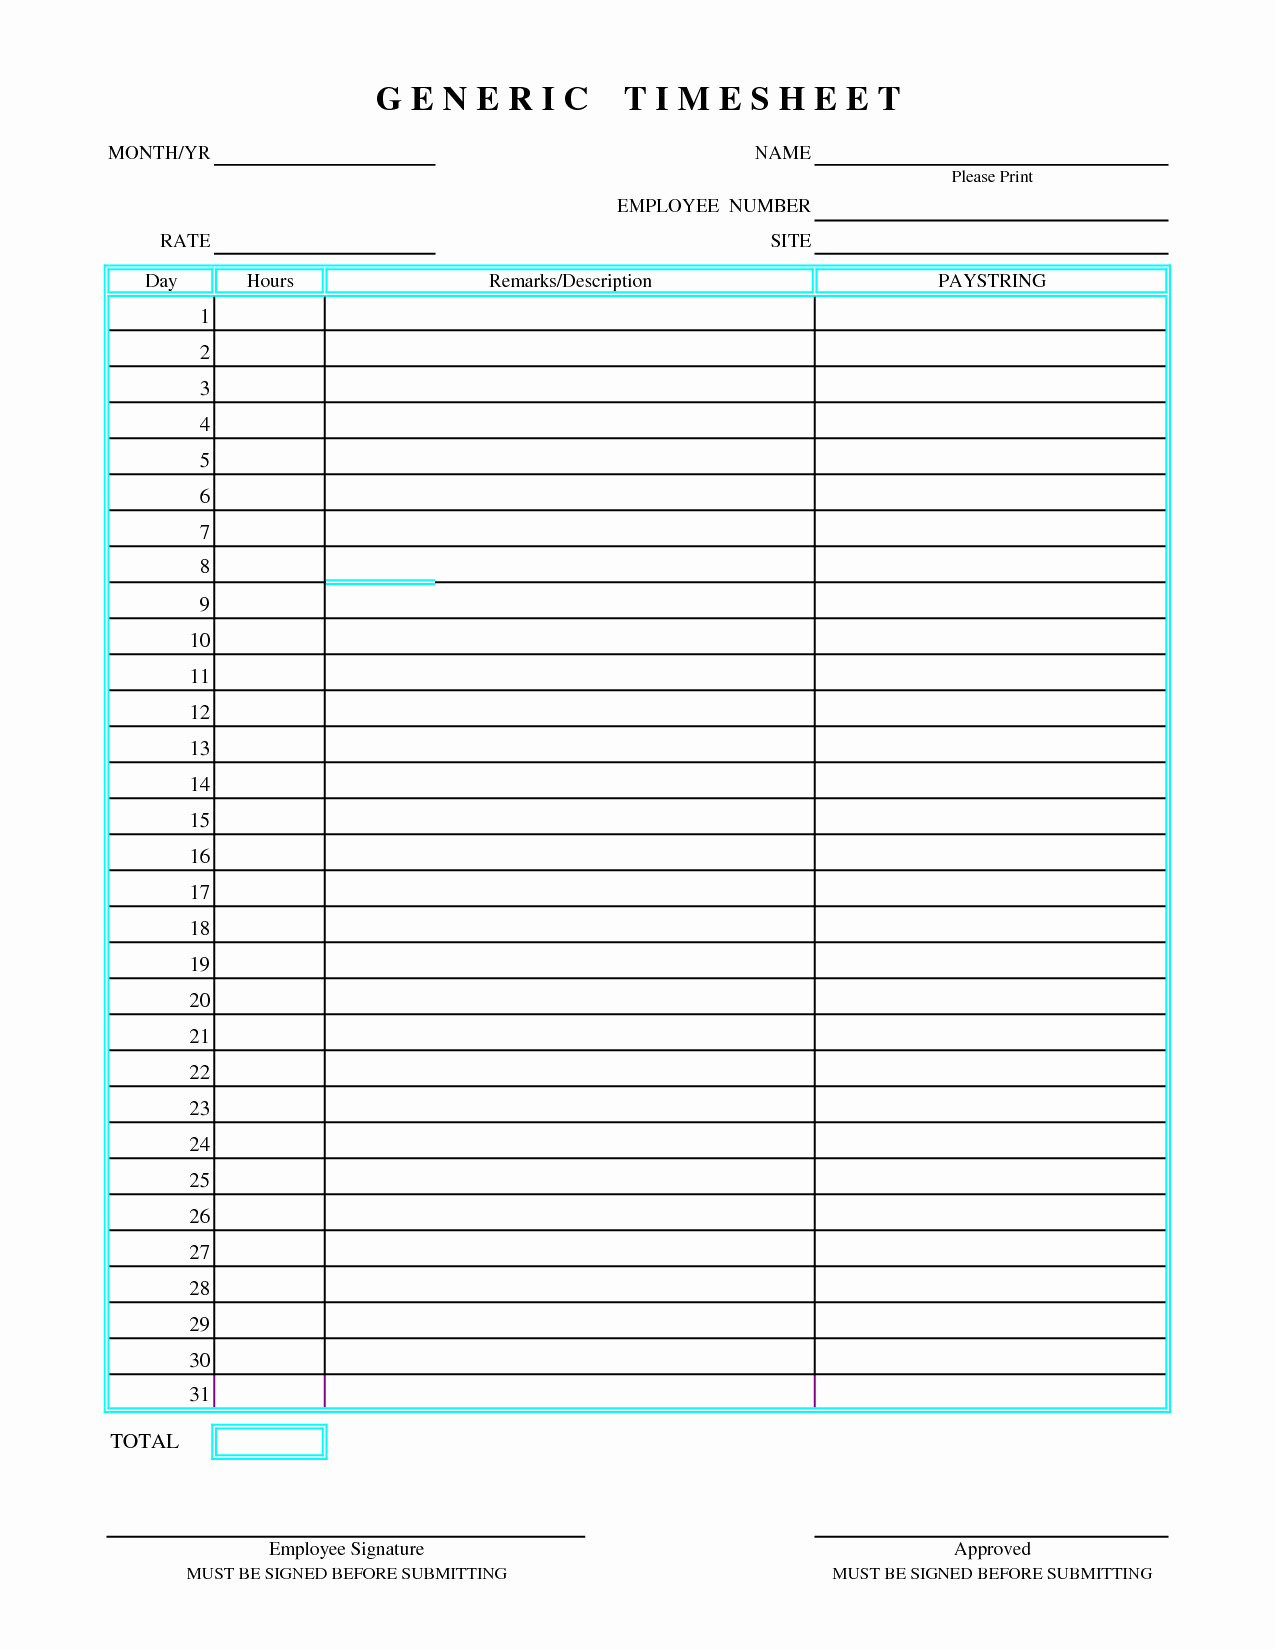 Free Printable Time Sheets Best Of Template Printable Gallery Category Page 62